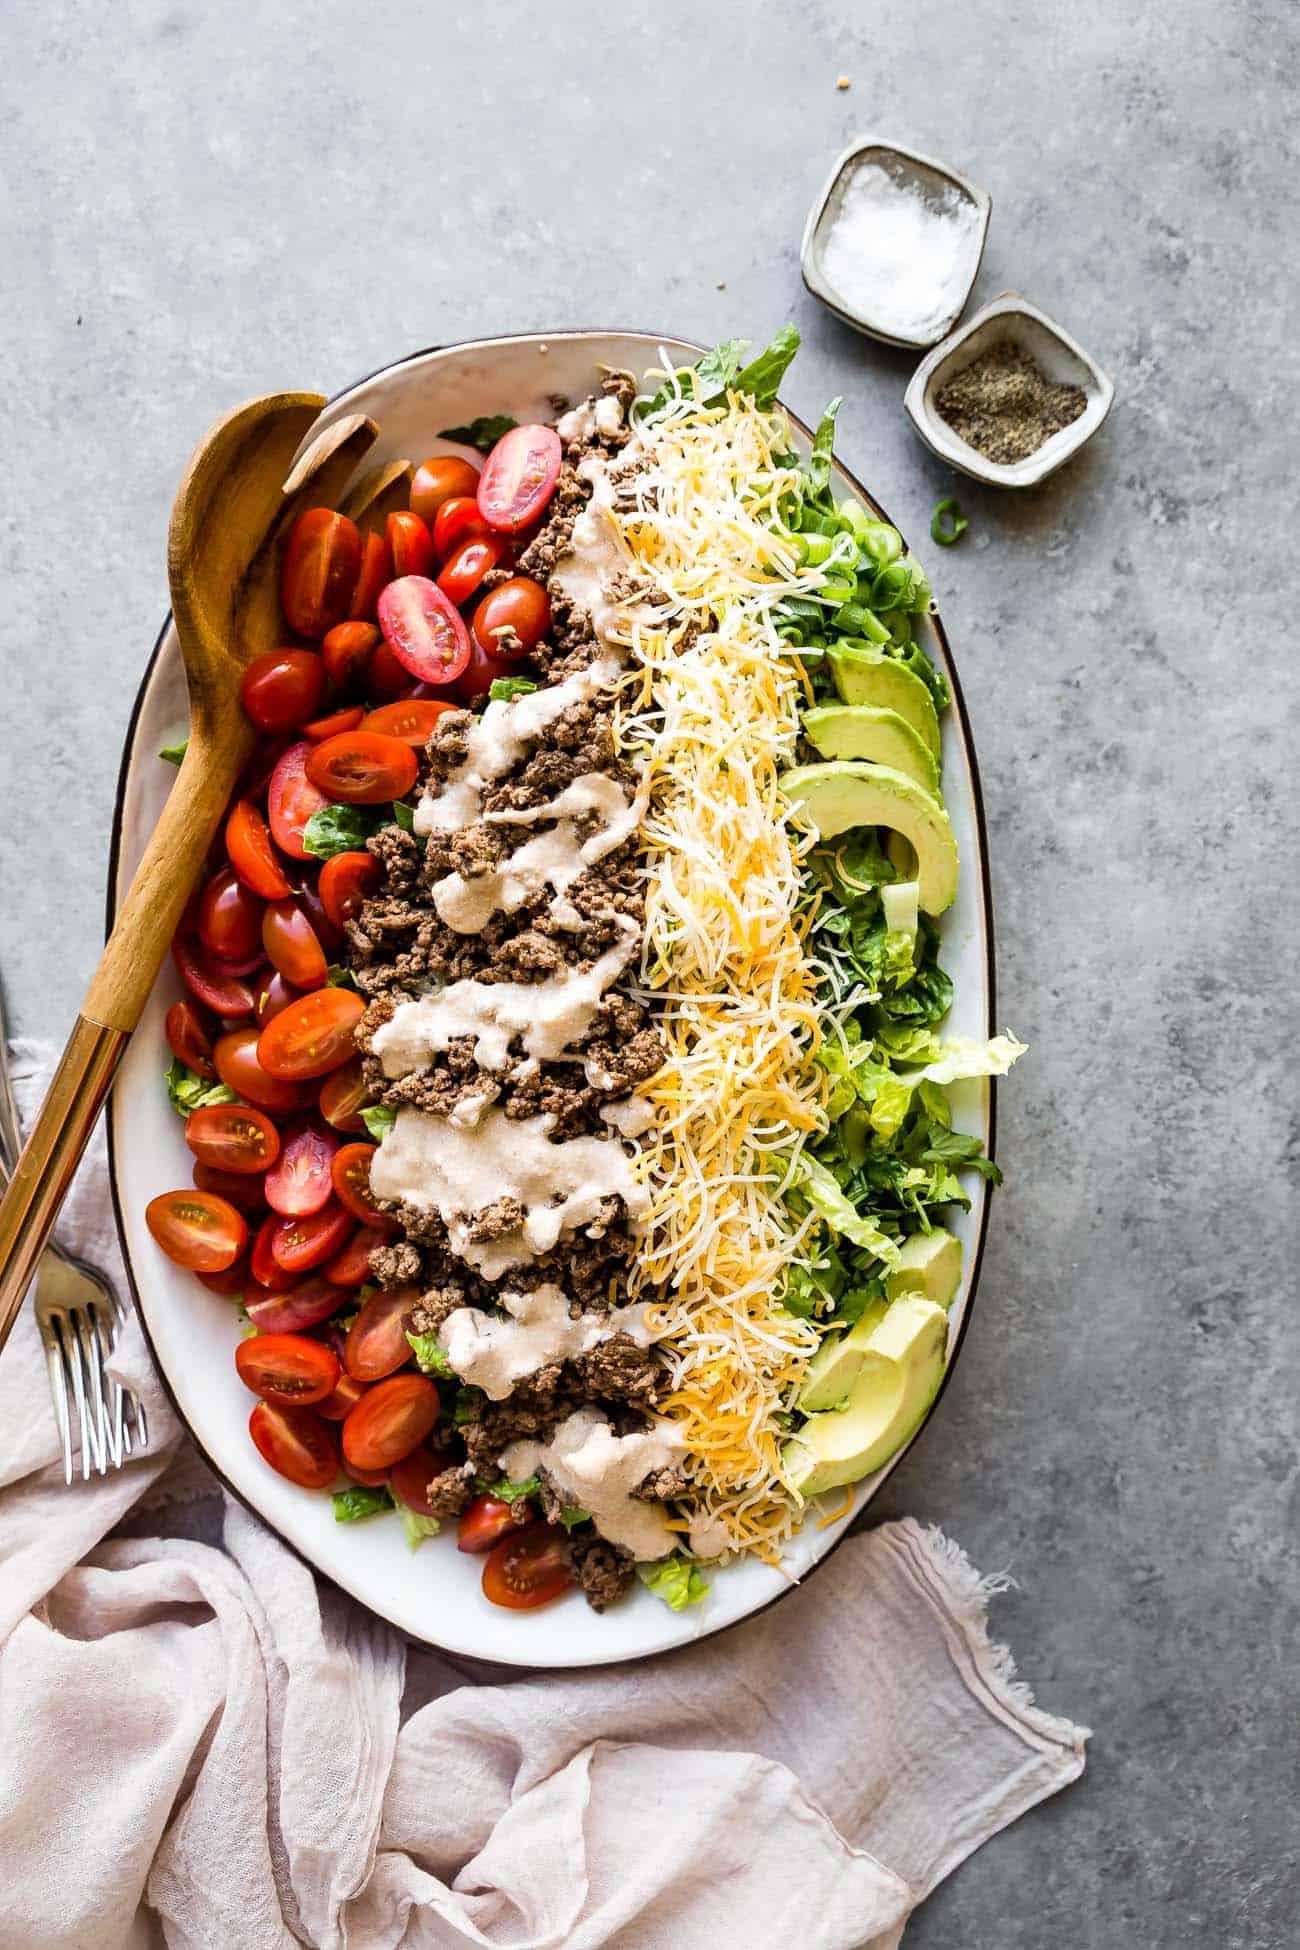 taco salad on a platter with tomatoes, shredded cheese, and avocado slices